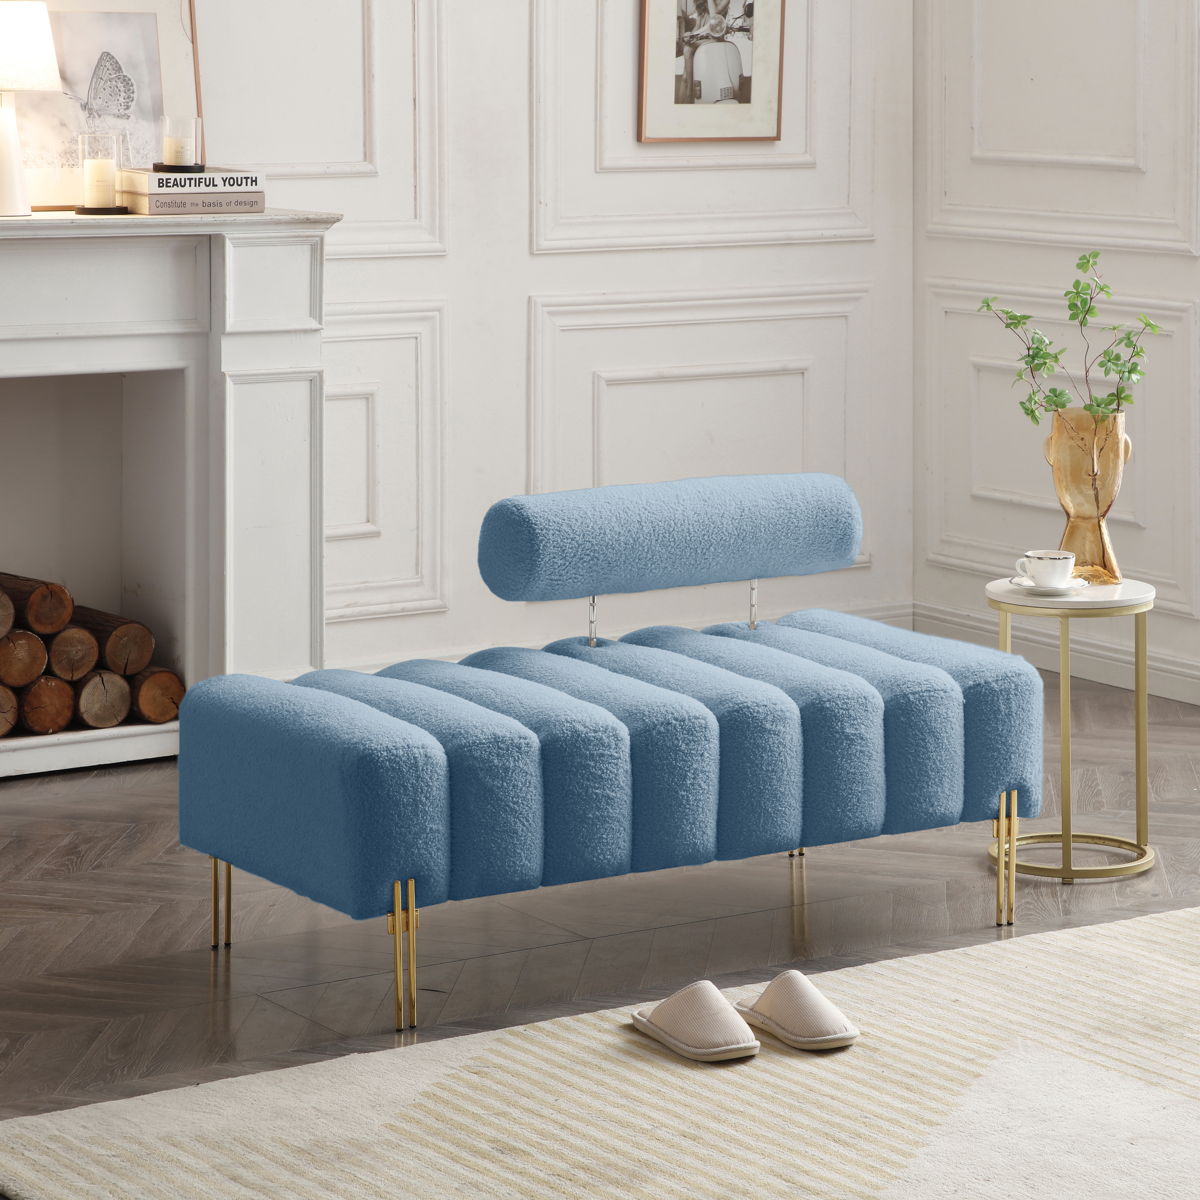 Width Modern End Of Bed Bench Sherpa Fabric Upholstered 2 Seater Sofa Couch Entryway Ottoman Bench Fuzzy Sofa Stool Footrest Window Bench With Gold Metal Legs For Bedroom Living Room, Light Blue